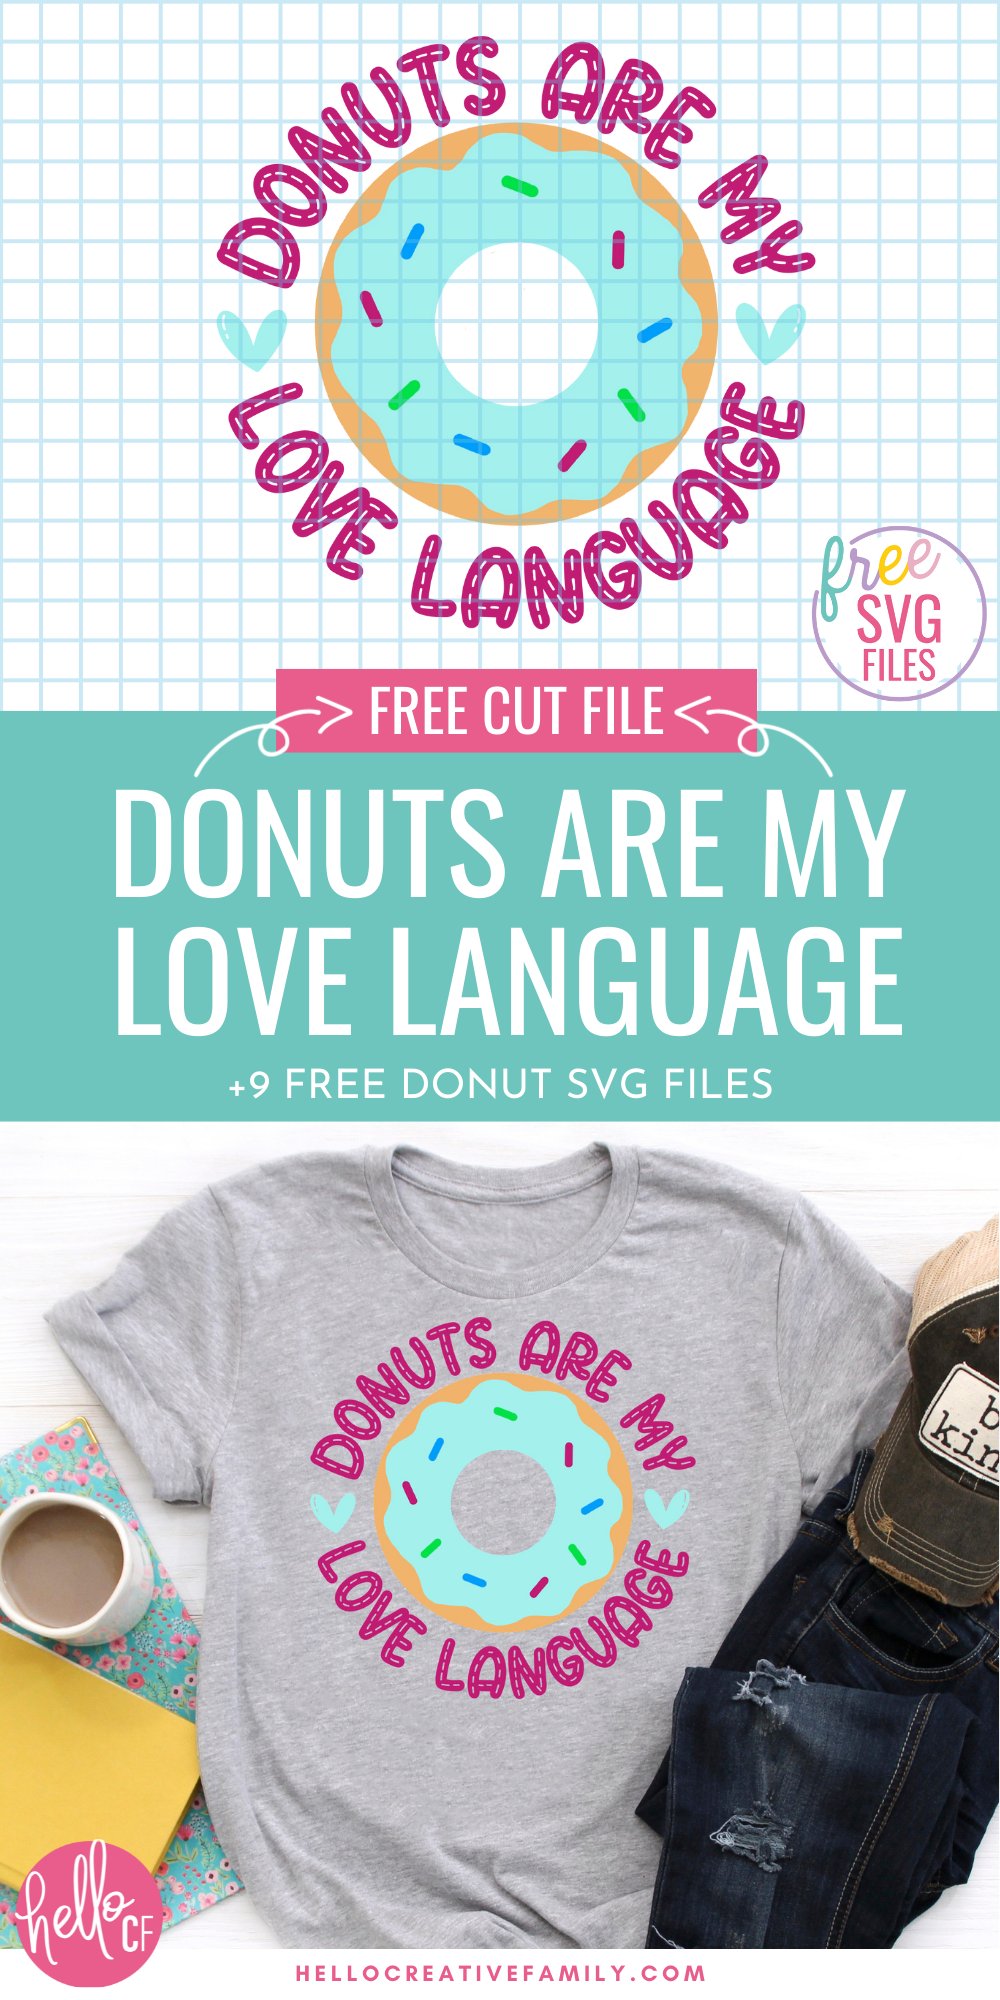 If you love sweet food puns then this is the cut file bundle for you! We're sharing free donut SVG files that you will love! Use them for making mugs, hoodies, t-shirts, throw pillows, tote bags and and so many more cutting machine crafts using your Cricut Maker, Cricut Explore, Cricut Joy or Silhouette Cameo. Includes Donuts Are My Love Language.